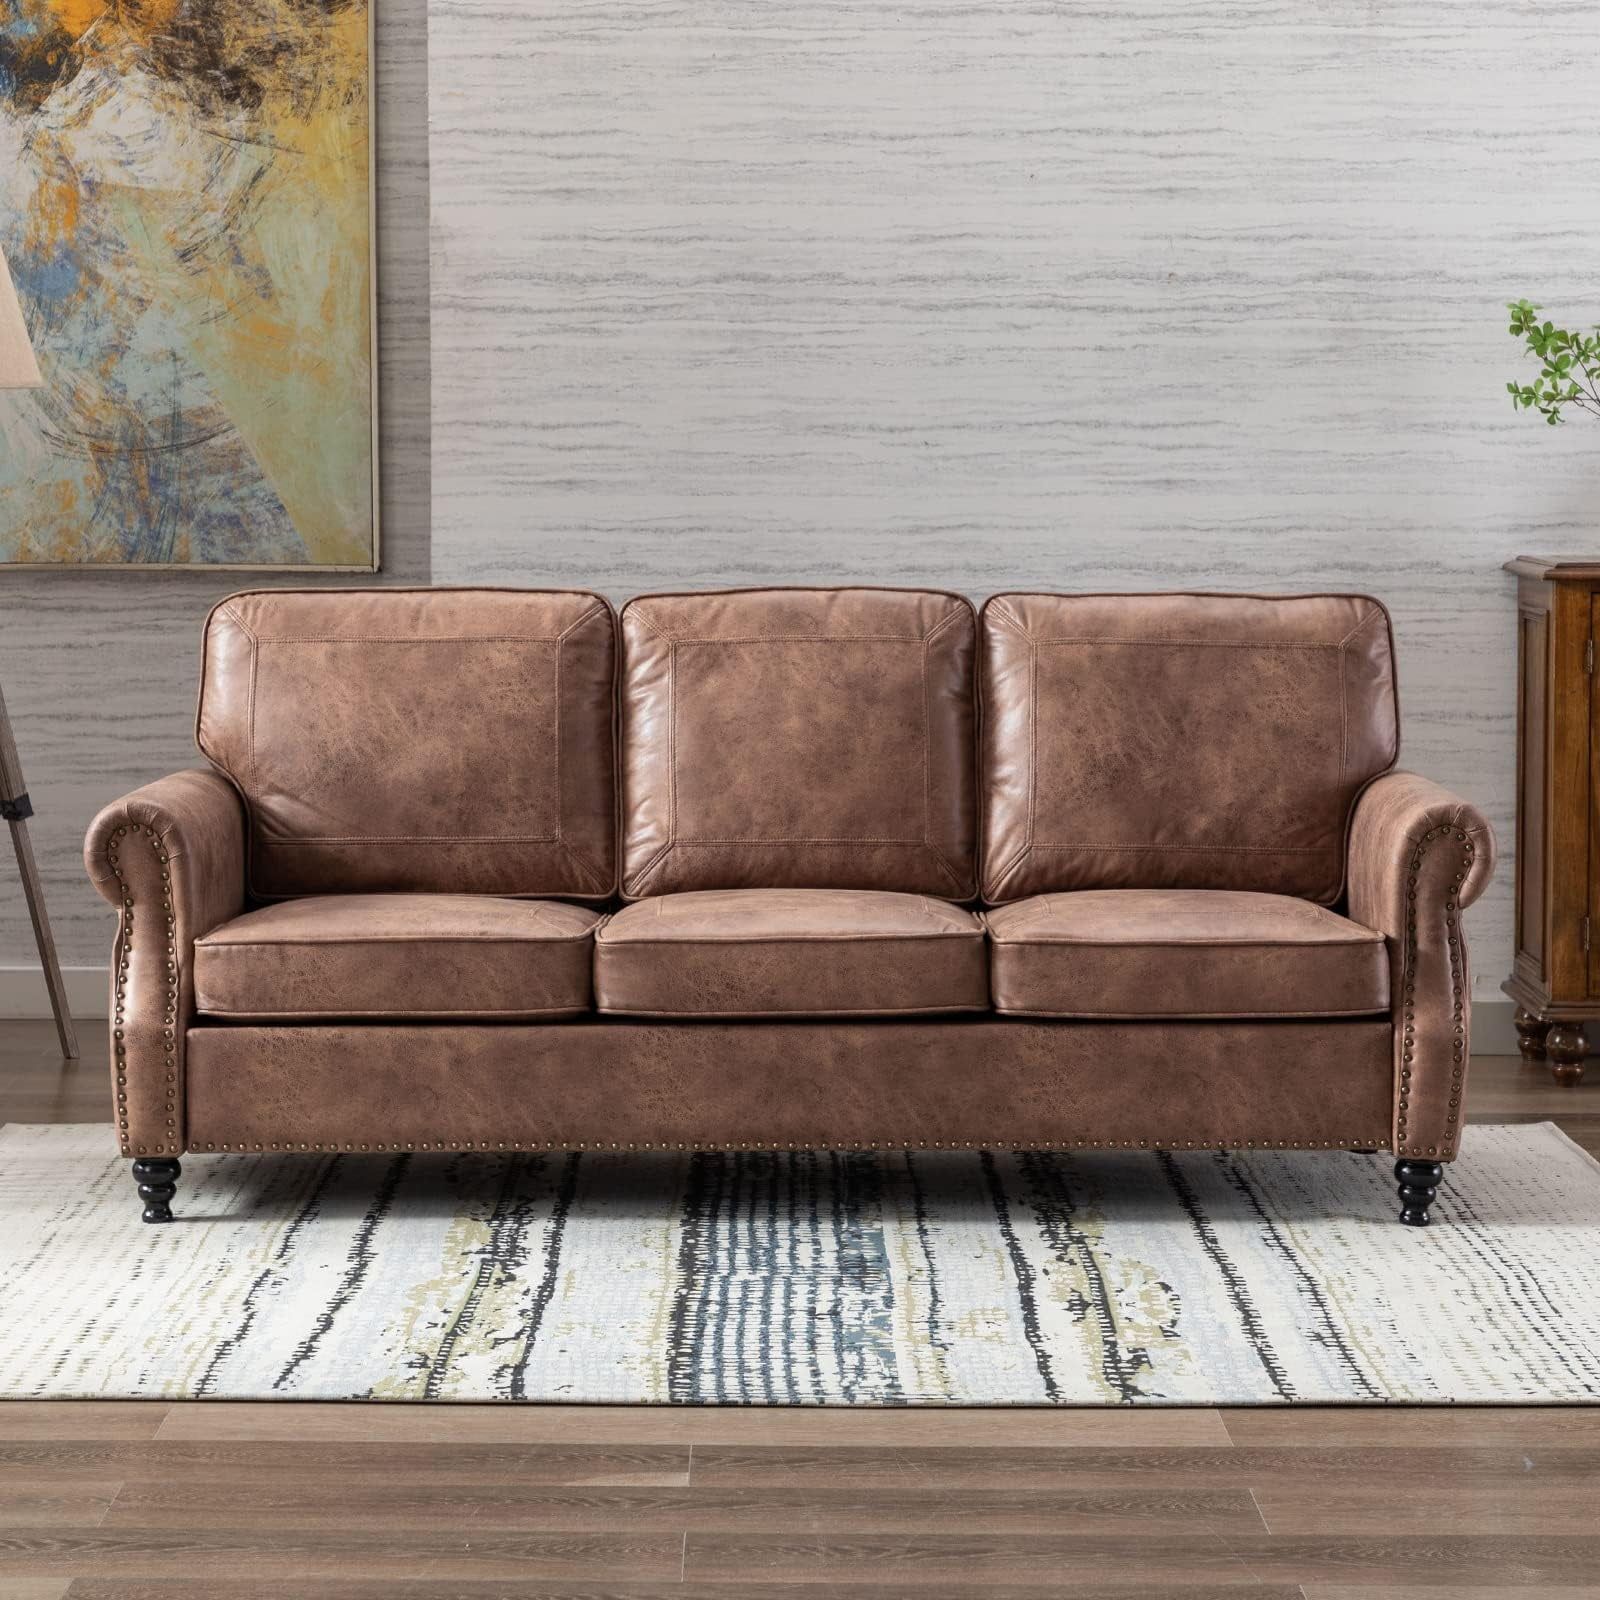 Dreamsir 80" Faux Leather Sofa Couch – Traditional 3 Seater With Nailhead  Trim, Rolled Arms, And Easy Assembly (dark Brown) – Walmart With Regard To Faux Leather Sofas In Chocolate Brown (Photo 7 of 15)